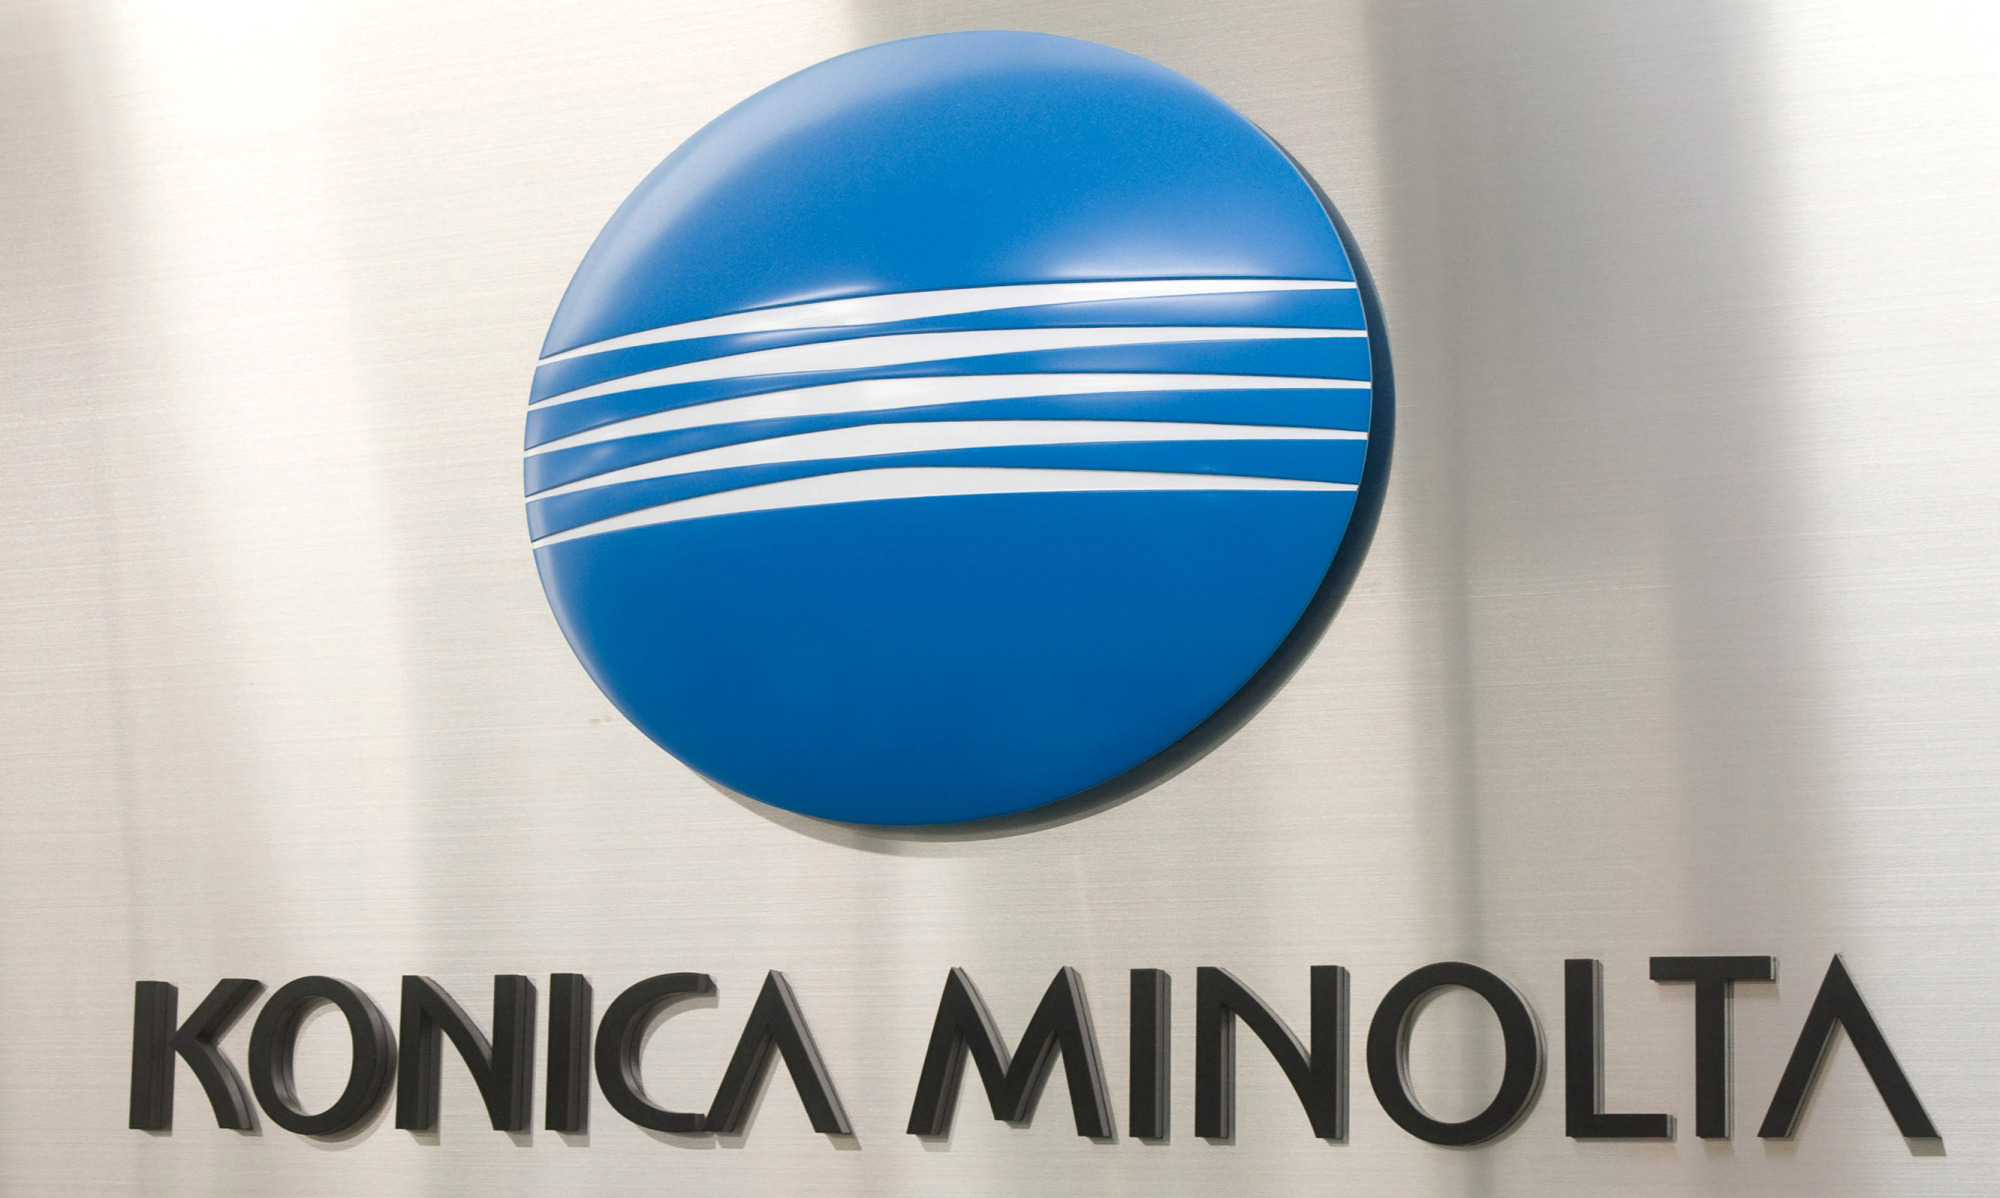 Konica Minolta has made a deal to acquire the U.S. genetic testing firm Ambry Genetics for up to &#36;1 billion. | BLOOMBERG